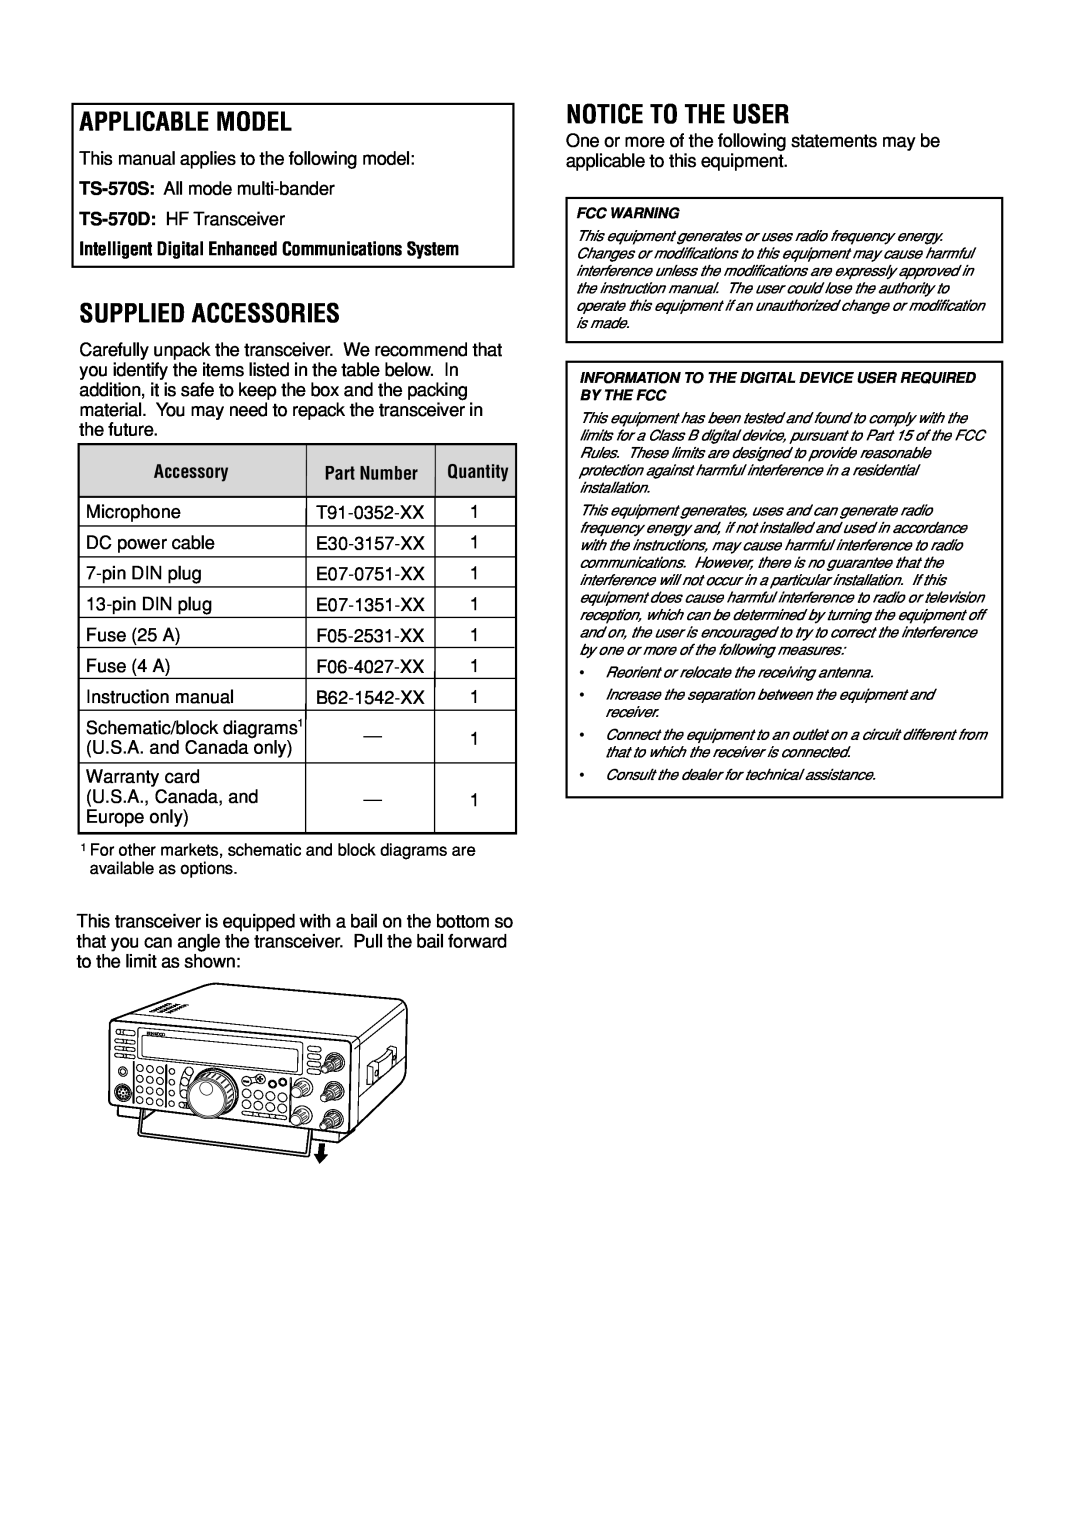 Kenwood TS-570D instruction manual Applicable Model, Supplied Accessories, Notice To The User, Accessory, Part Number 